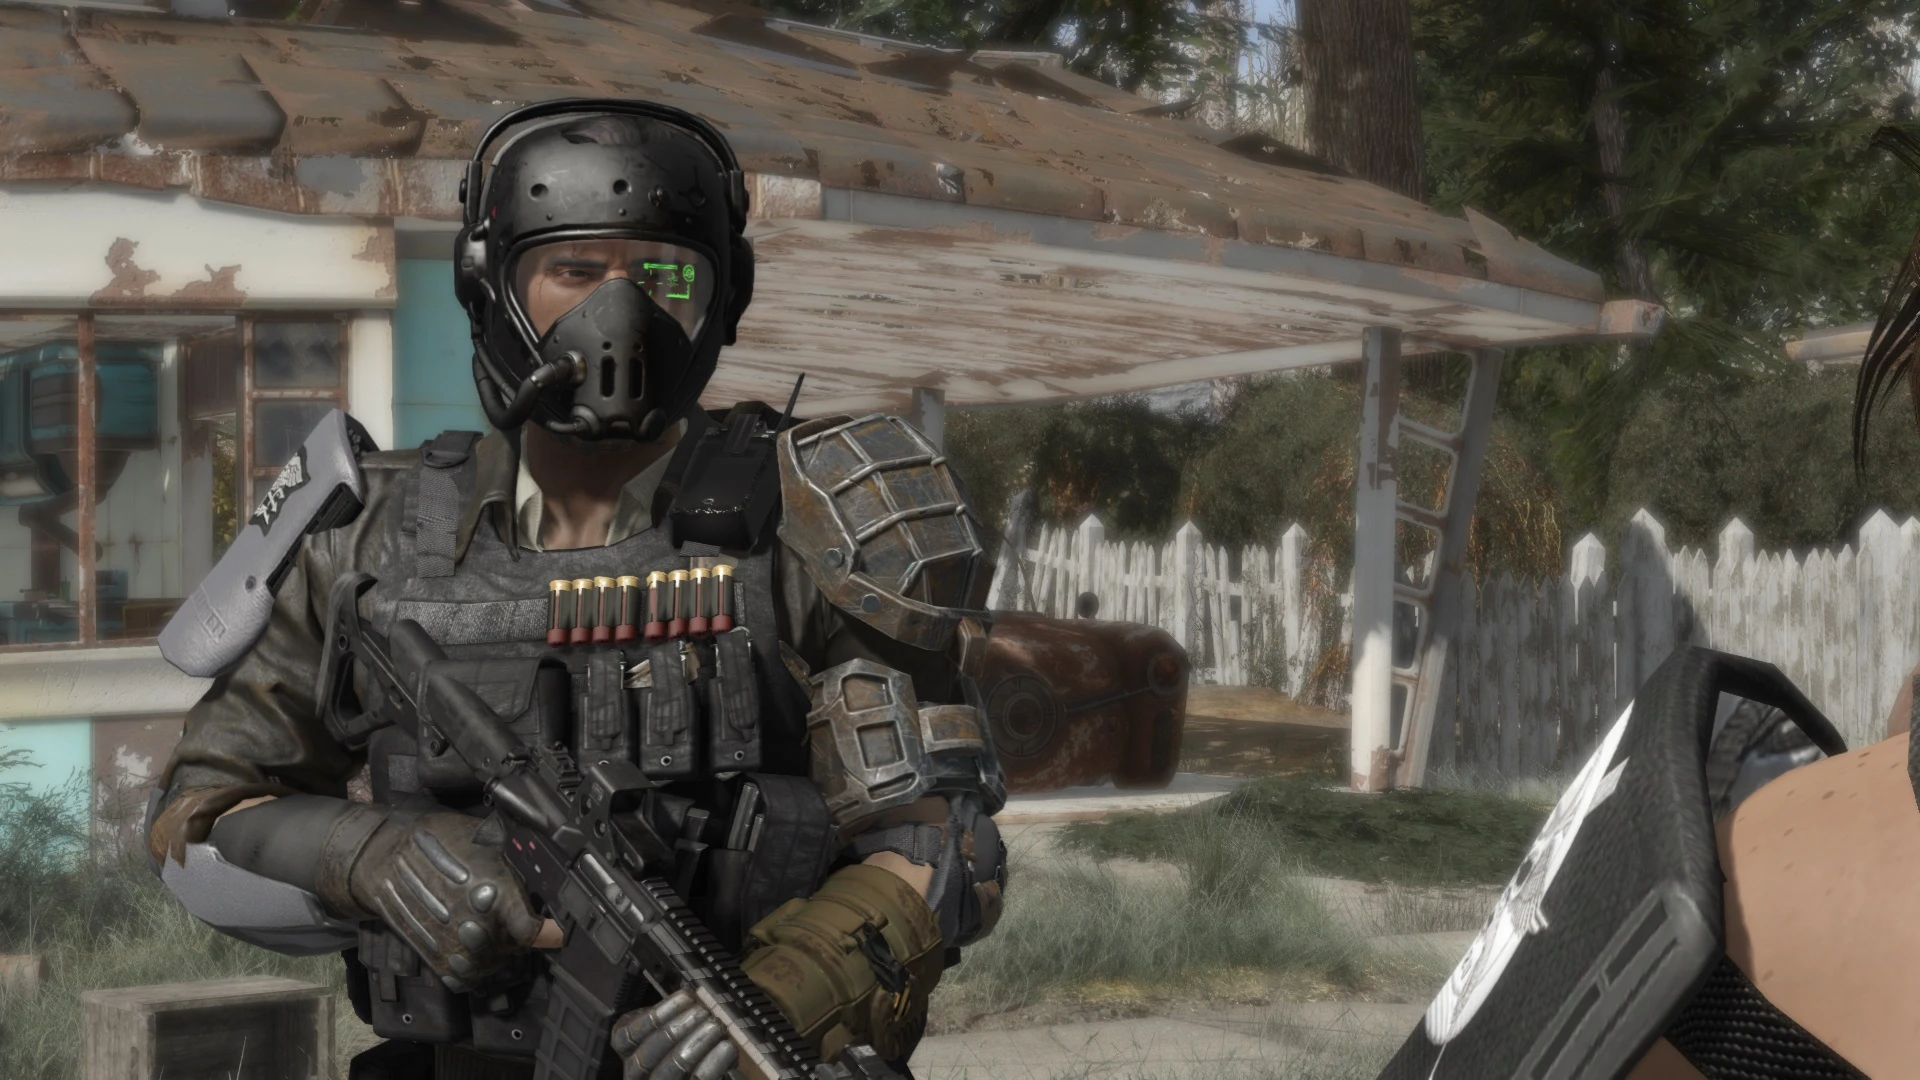 Spec Ops Player At Fallout 4 Nexus Mods And Community